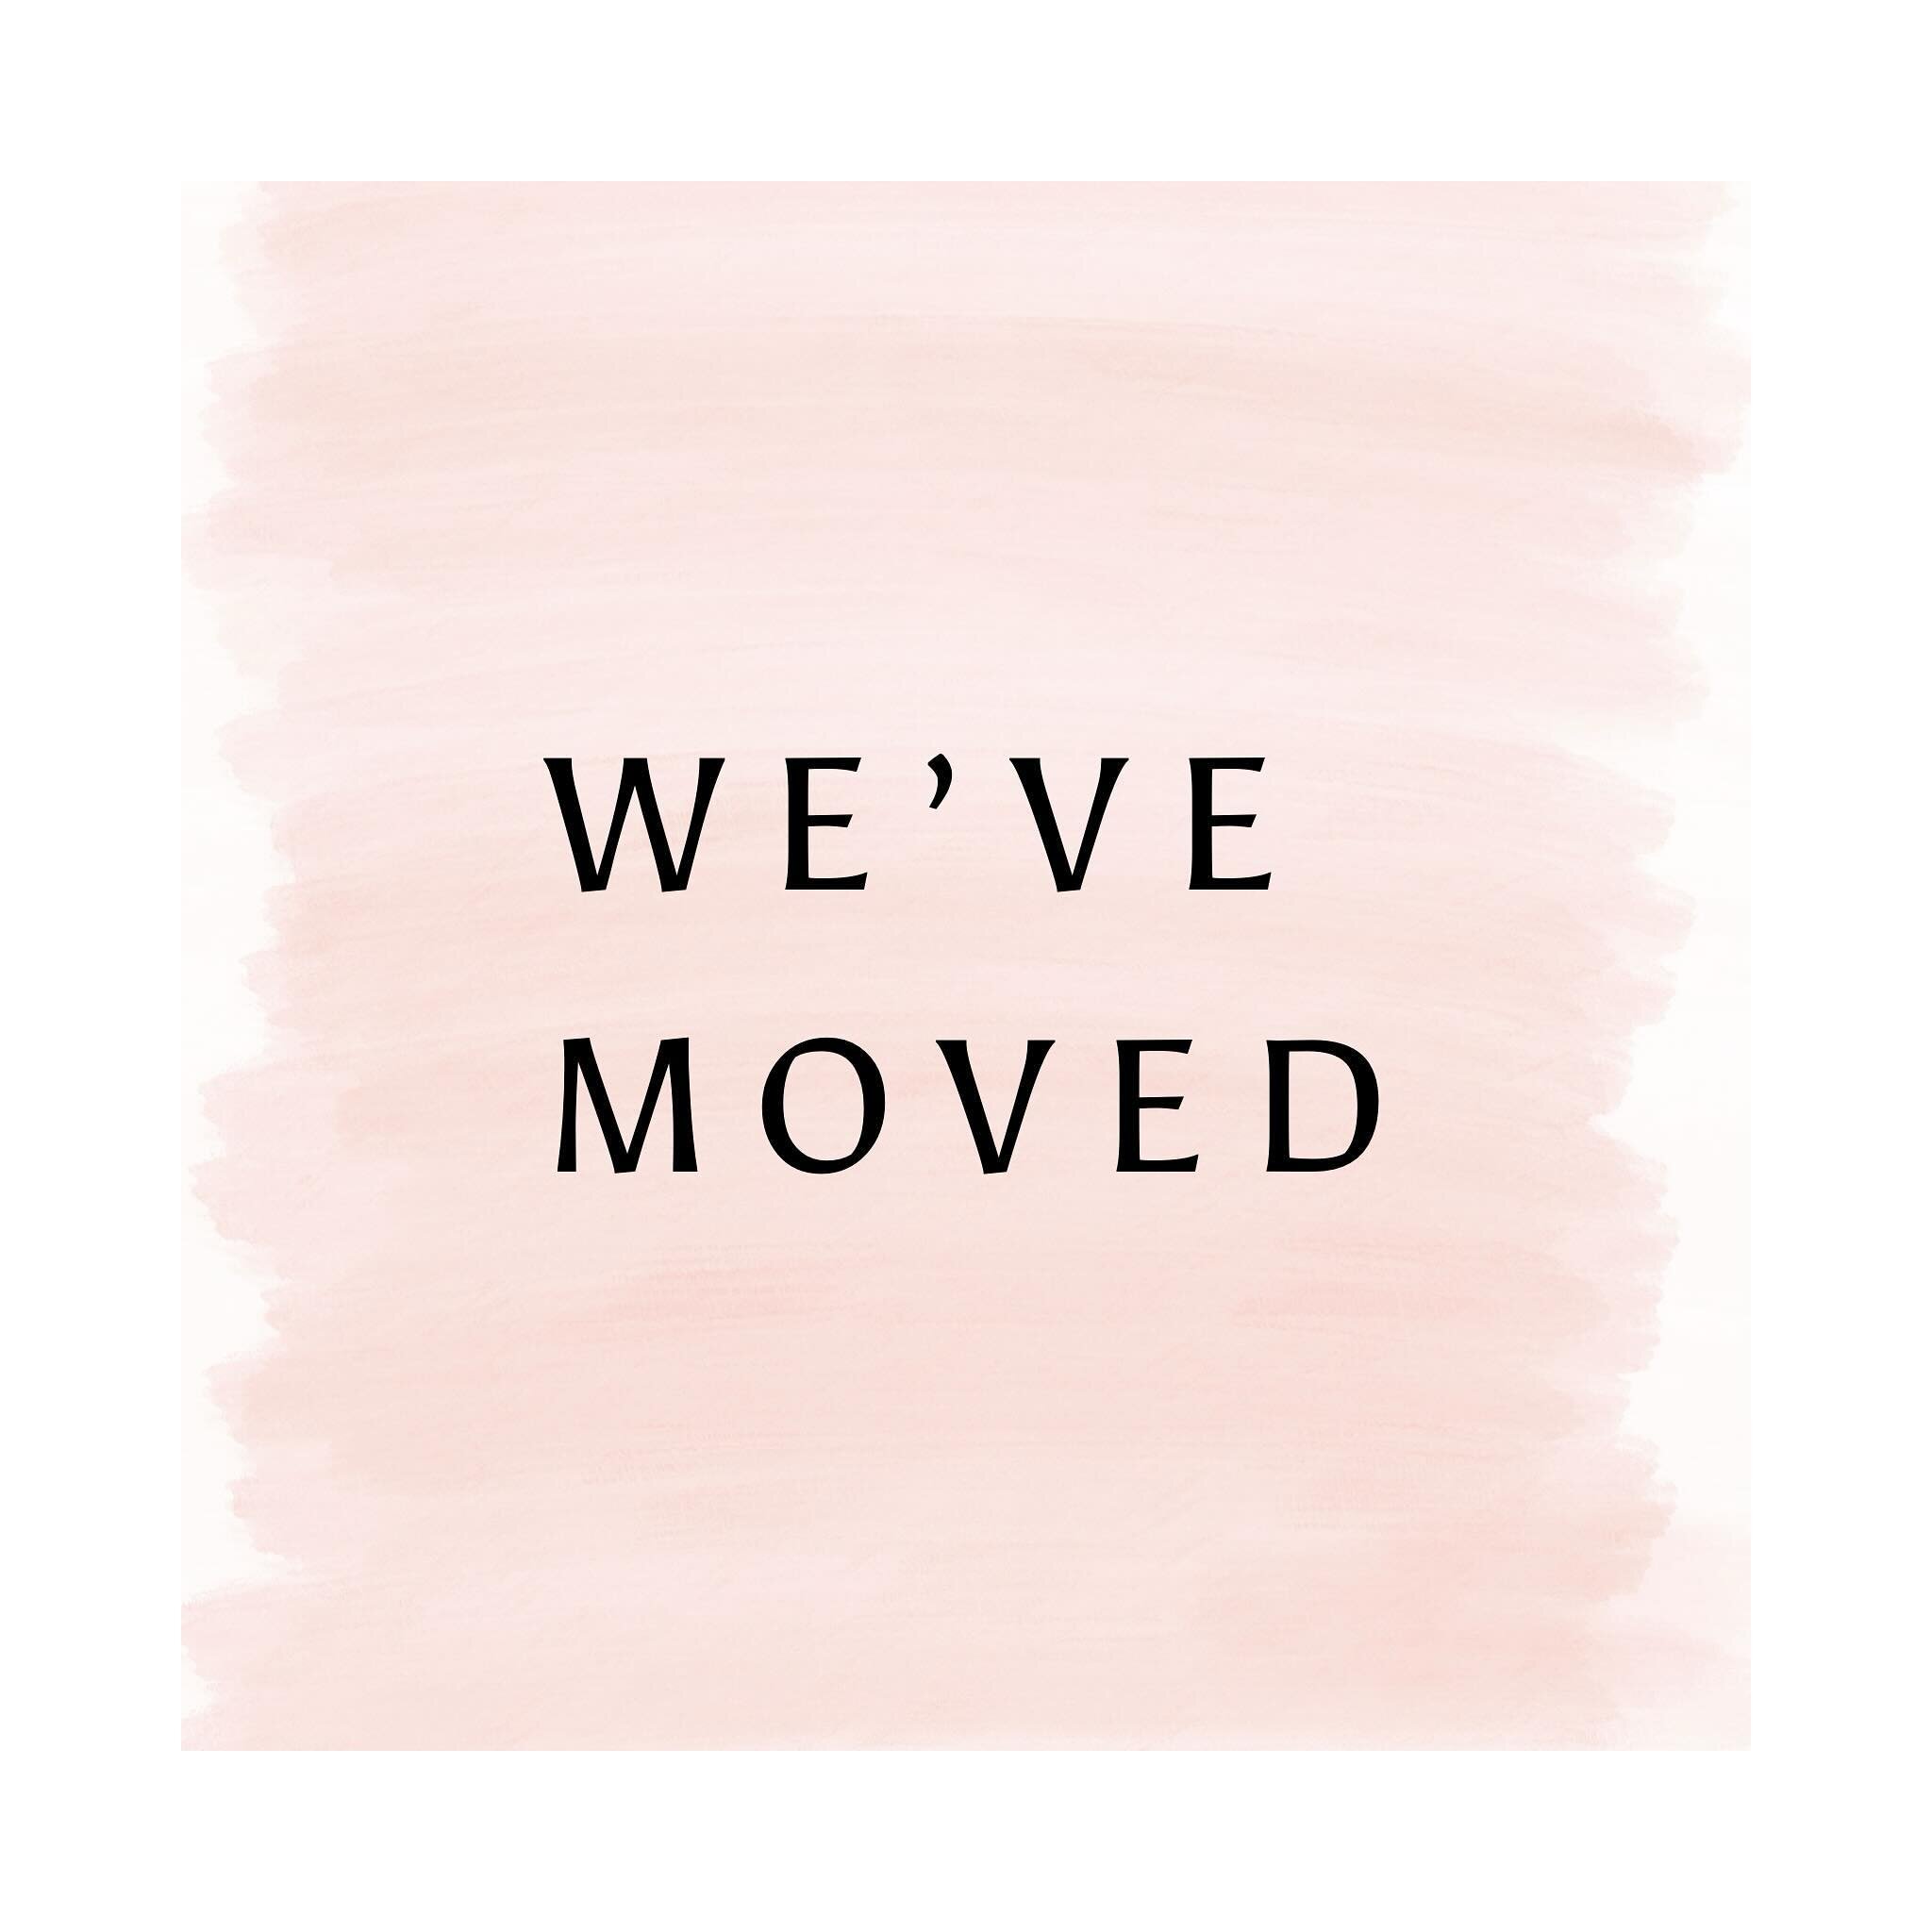 We&rsquo;ve Moved!!!!!! 🍾

We don&rsquo;t hold onto things that don&rsquo;t fit right or feel right.  Around here we let things go that sometimes don&rsquo;t work with our business model. 
We recently packed up our store on Main Street and moved 2 m